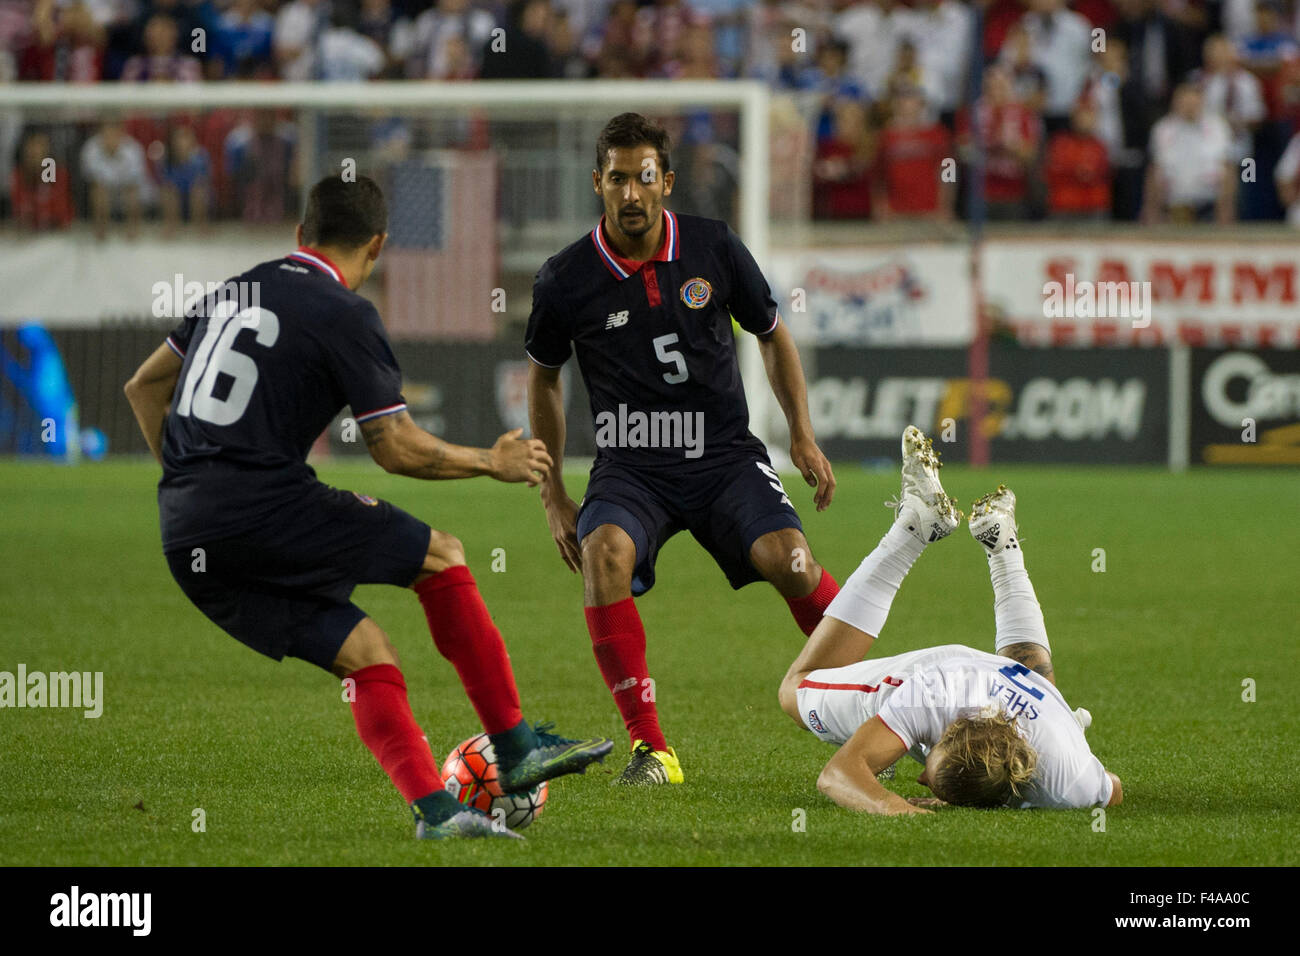 October 13, 2015: USA defender Brek Shea (7) falls down as Costa Rica defender Christian Gamboa (16) and Costa Rica midfielder Celso Borges (5) play the ball during The USA Men's National Team vs. Costa Rica Men's National Team- international friendly at Red Bull Arena - Harrison, NJ. Costa Rica defeated The US Men's National Team 1-0. Mandatory Credit: Kostas Lymperopoulos/Cal Sport Media Stock Photo